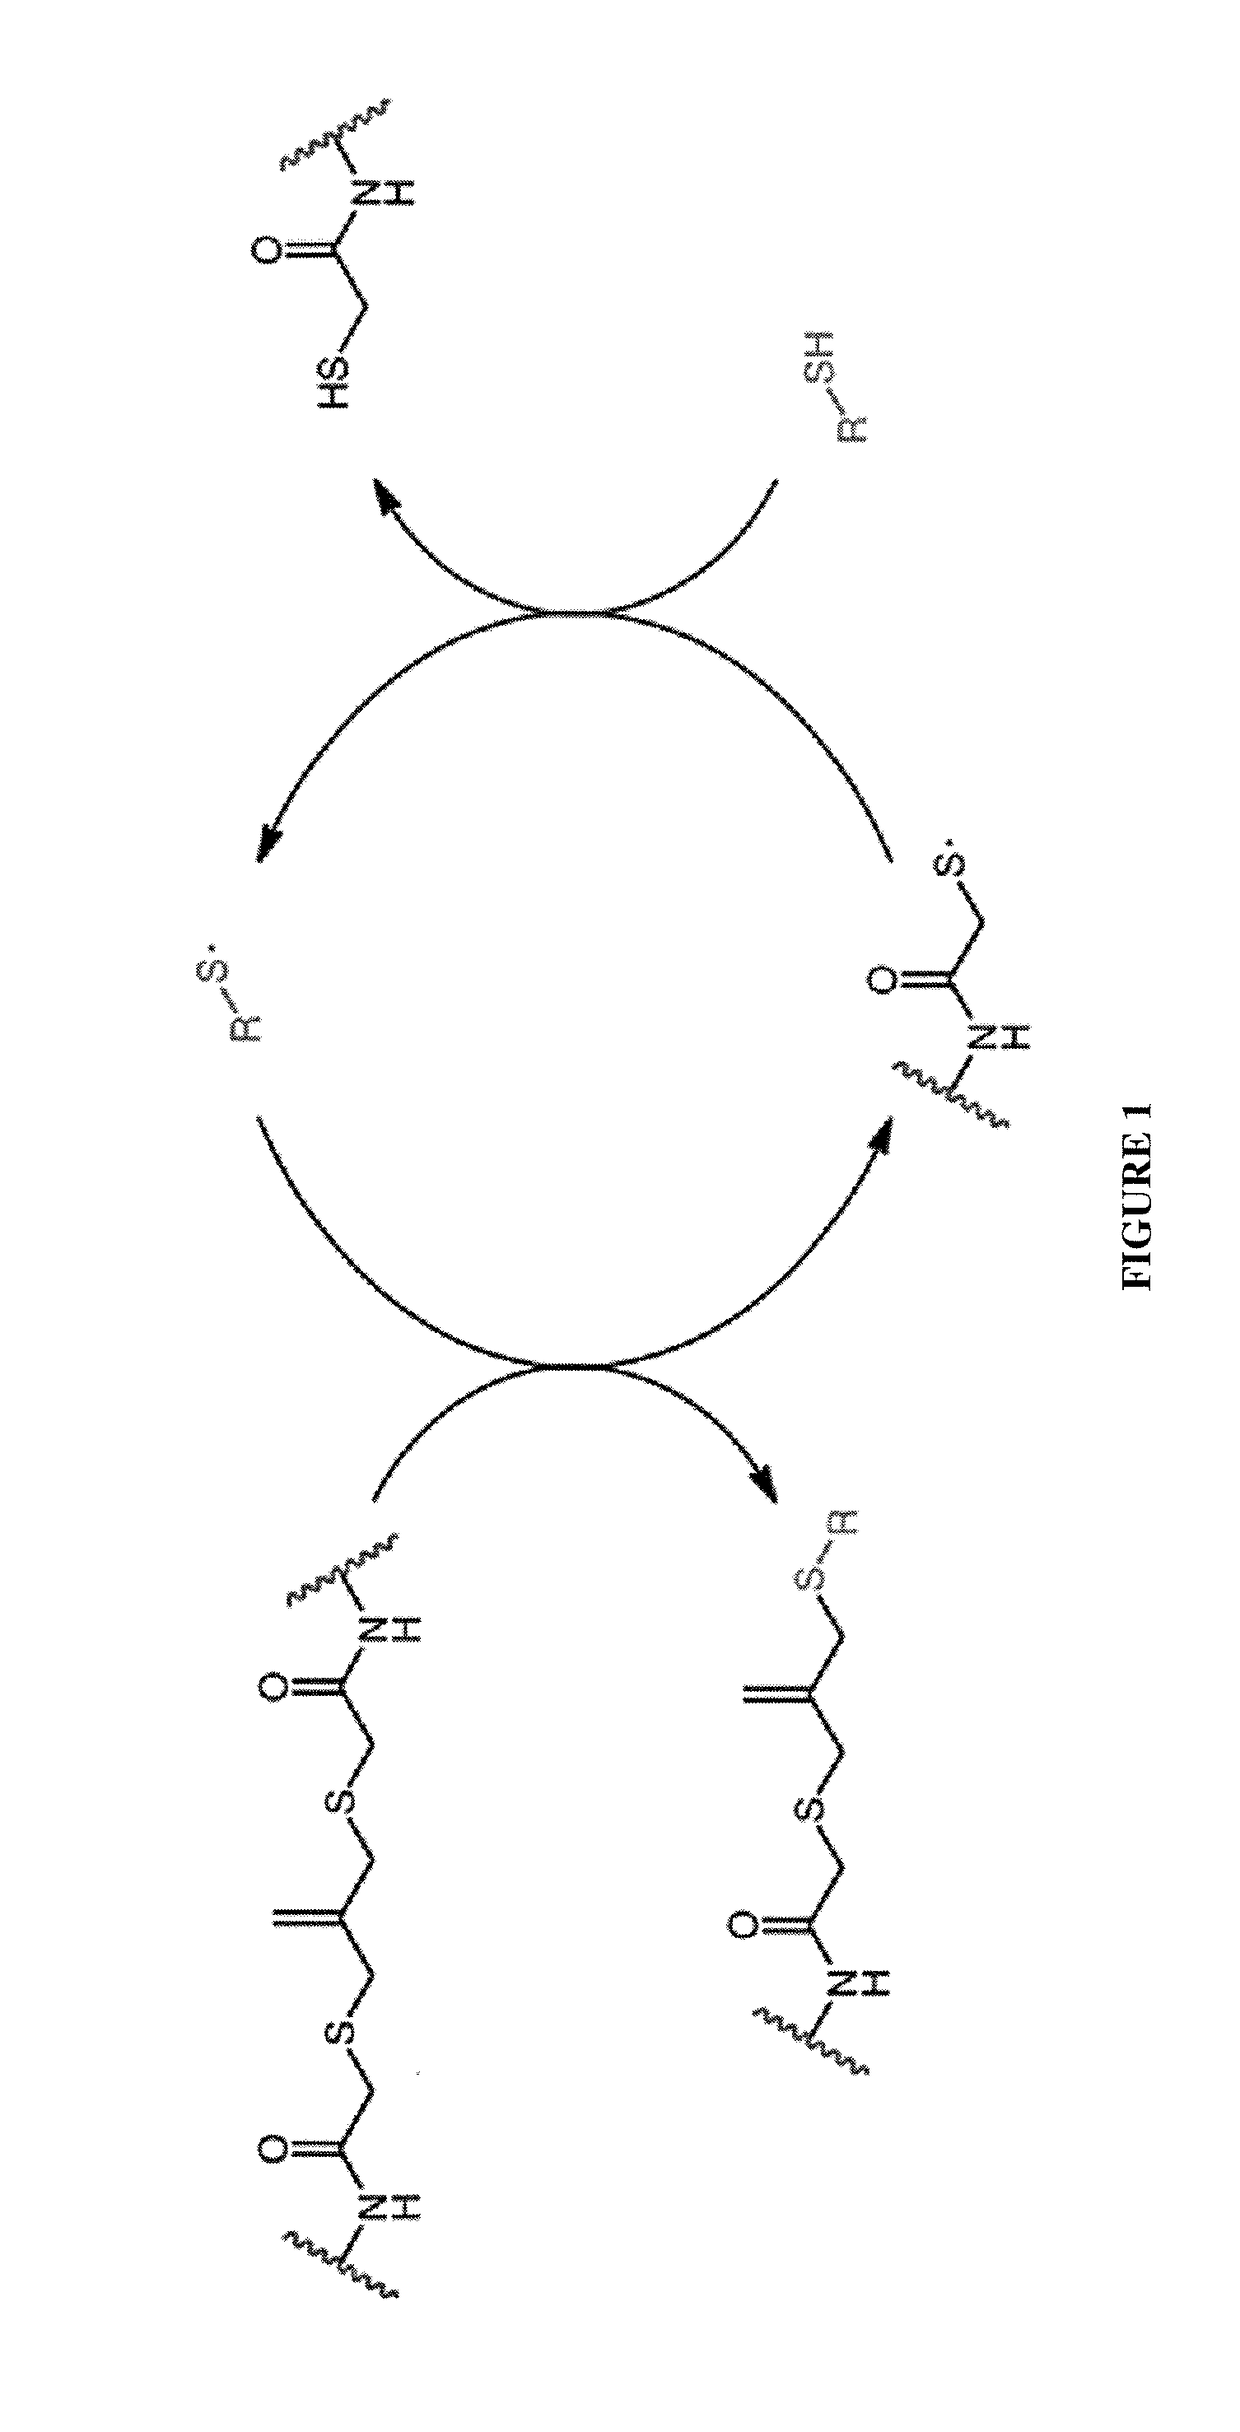 Amplified Photodegradation of Hydrogels and Methods of Producing the Same